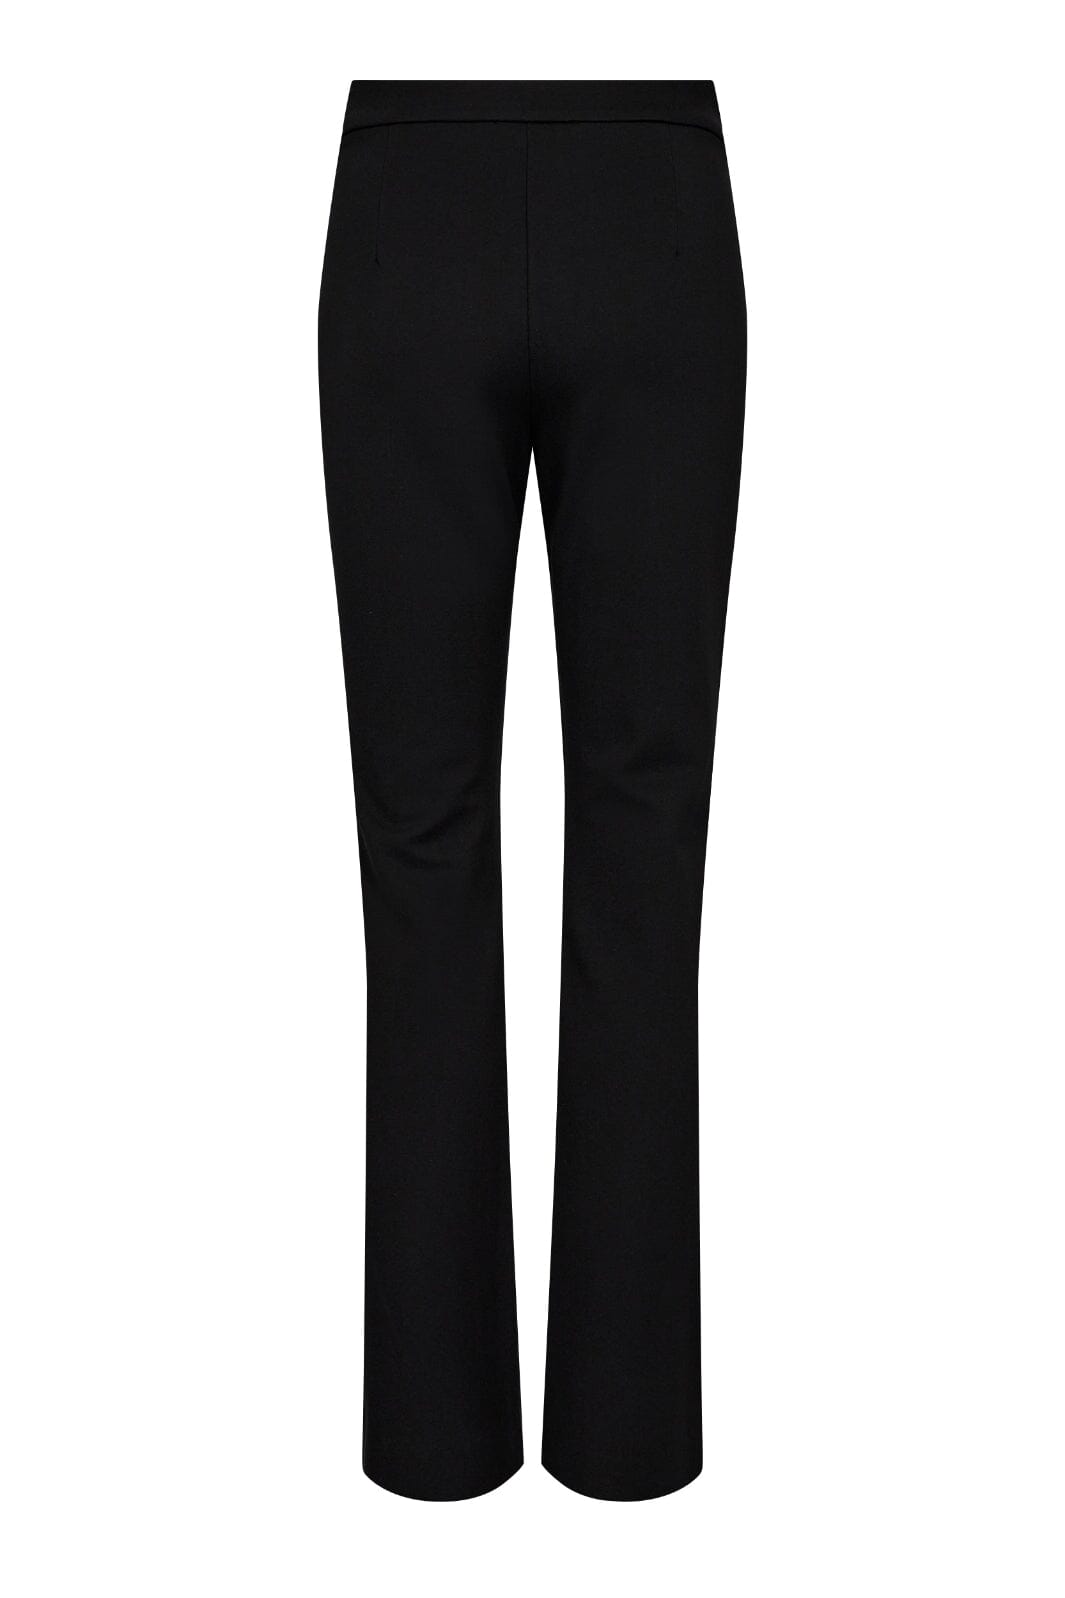 Co´couture - Stacycc Flare Pant - 96 Black Bukser 